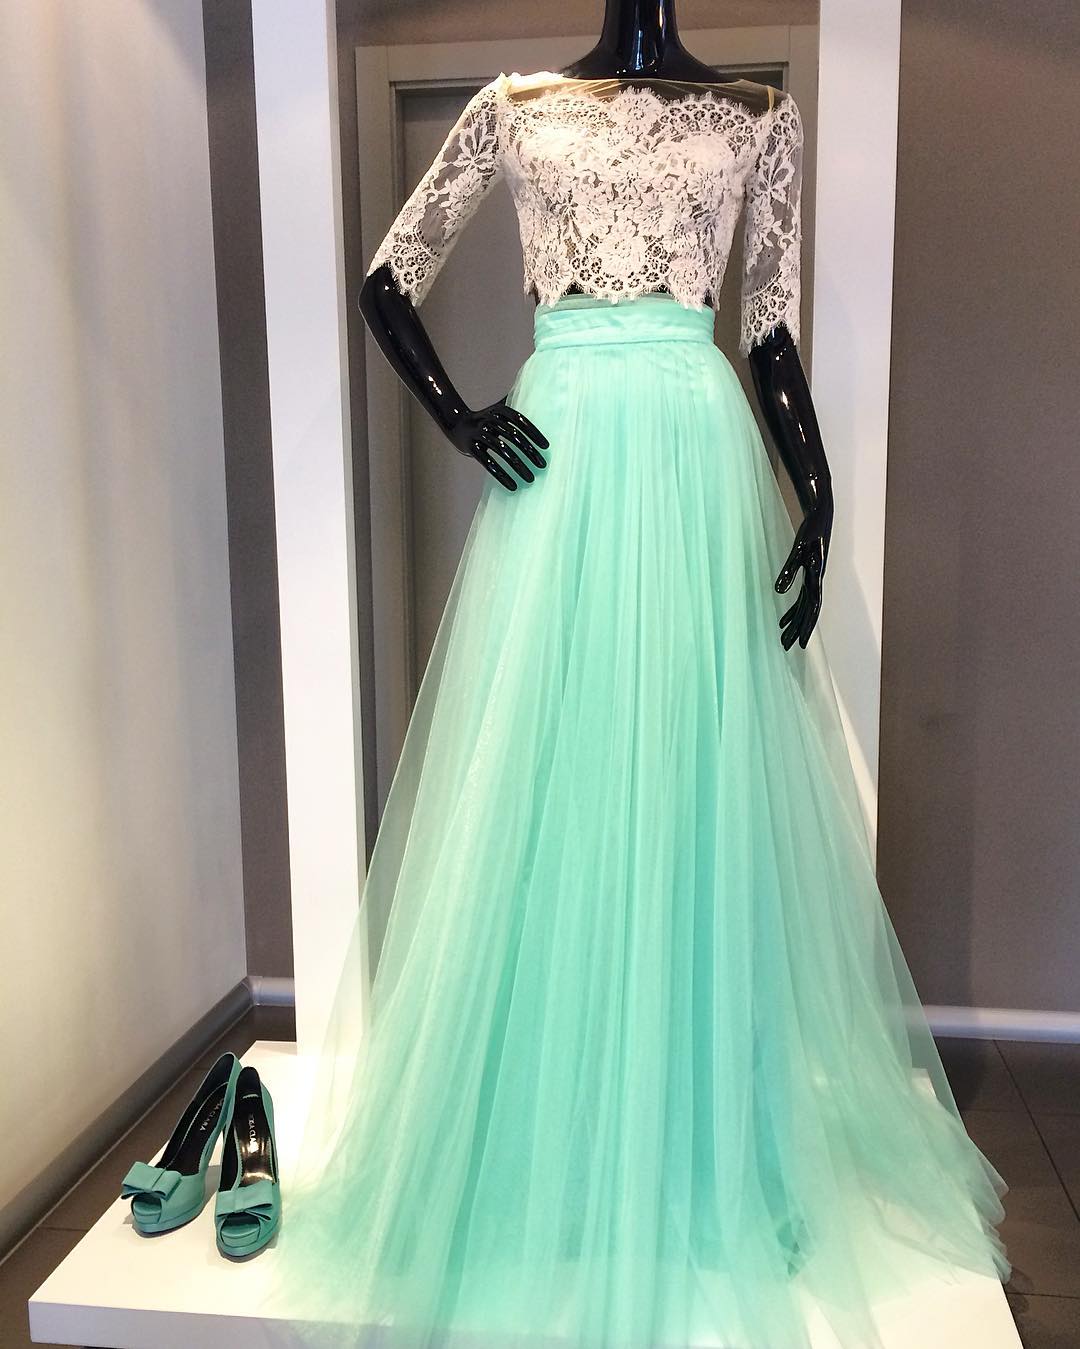 Two Piece Prom Dresses,prom Dresses With Sleeves,long Prom Dresses 2017,elegant Prom Dress,tulle Dress